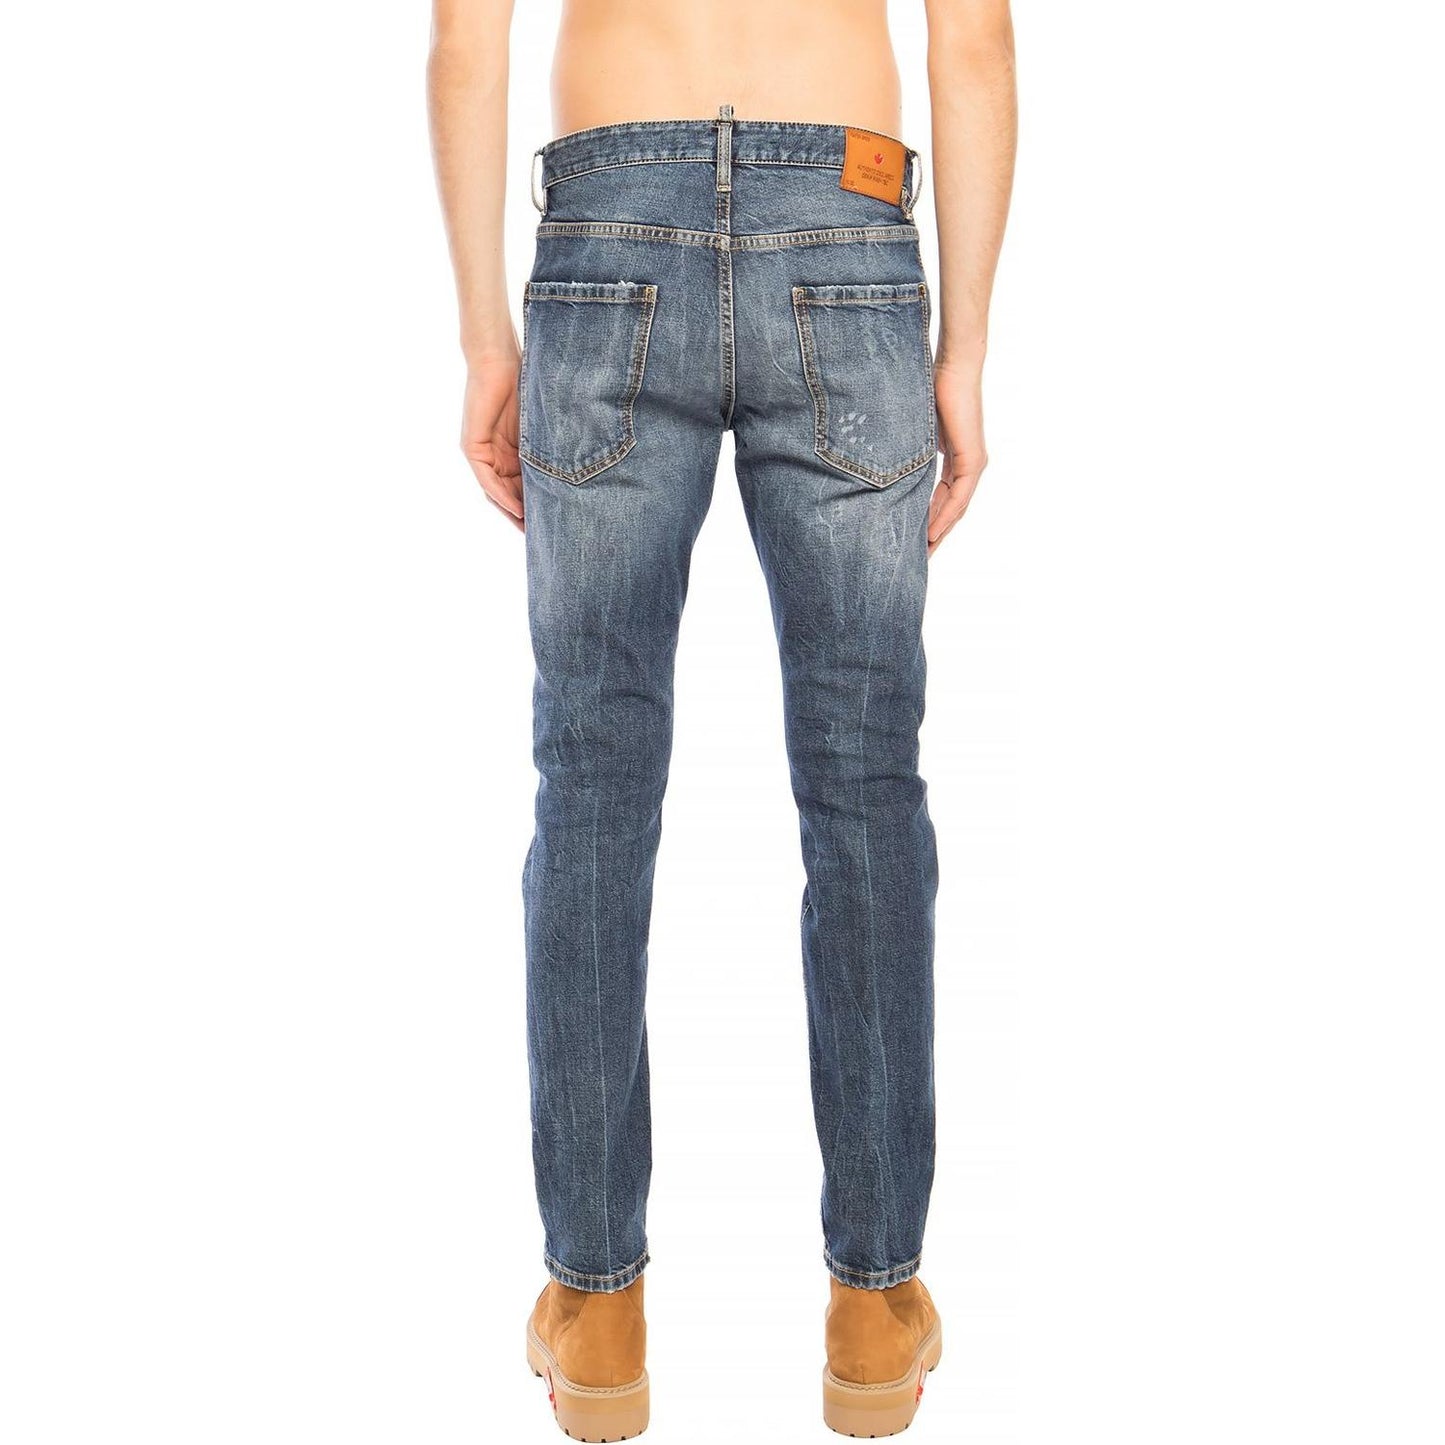 Dsquared² Sleek Navy Distressed Cool Guy Jeans blue-cotton-jeans-pants-3